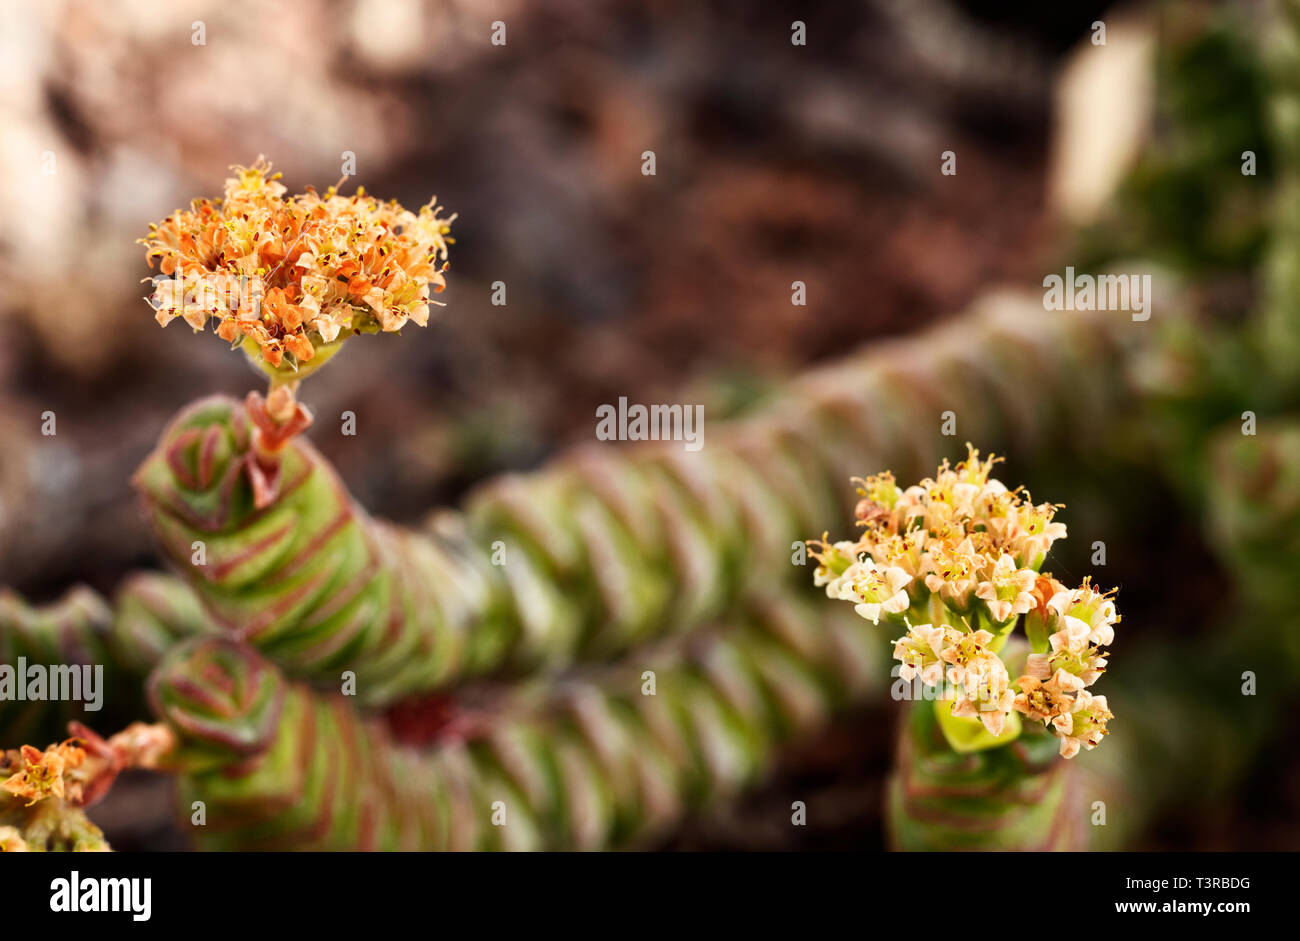 Flowers of crassula marneriana also called jade necklace  or Chinese pagoda ,a succulent plant with thick green rounded leaves and yellow flowers Stock Photo